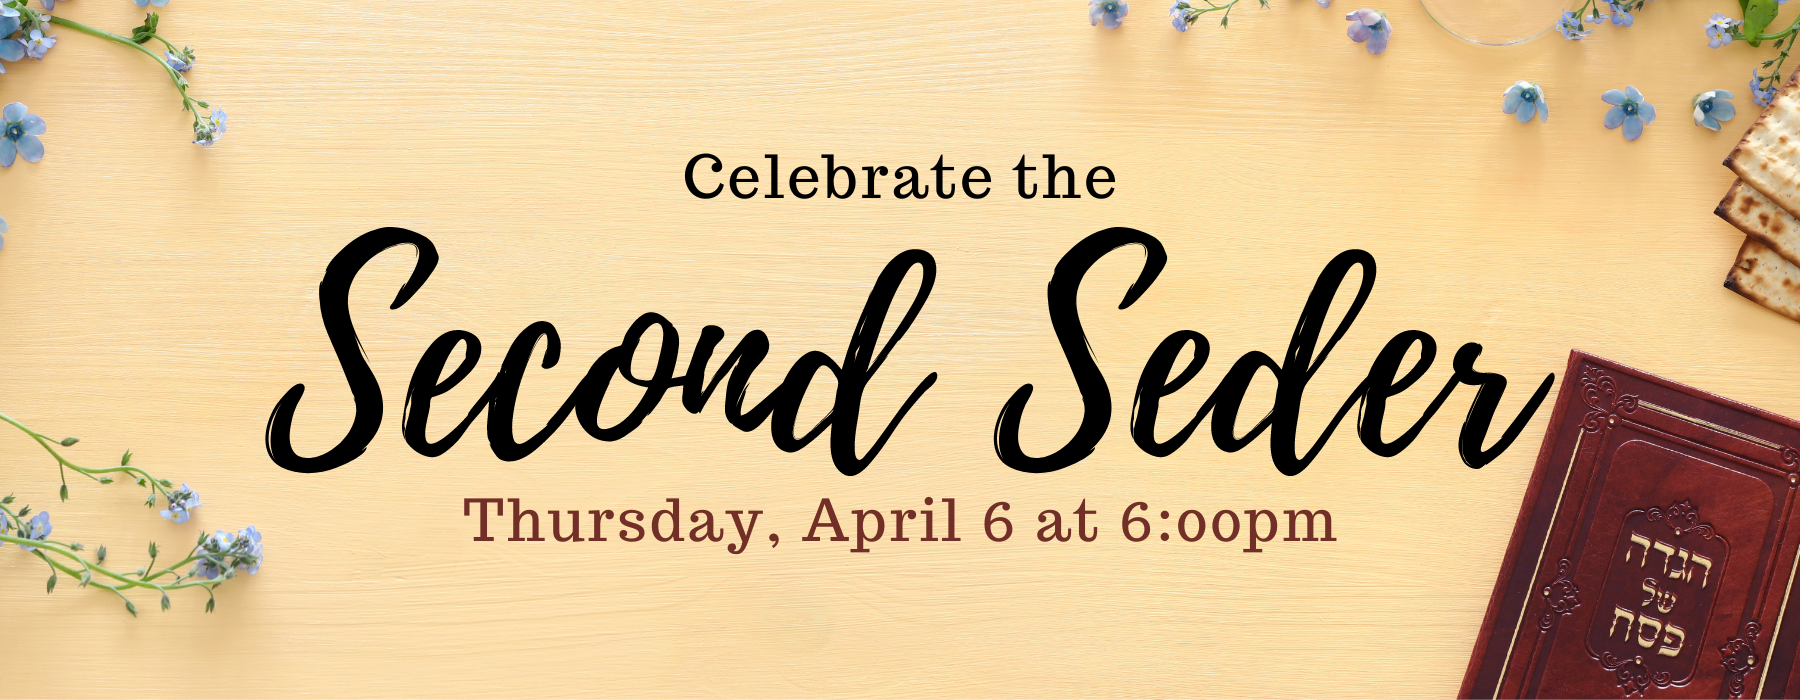 Graphic with text reading "Celebrate the Secong Seder. Thursday, April 6 at 6:00pm."